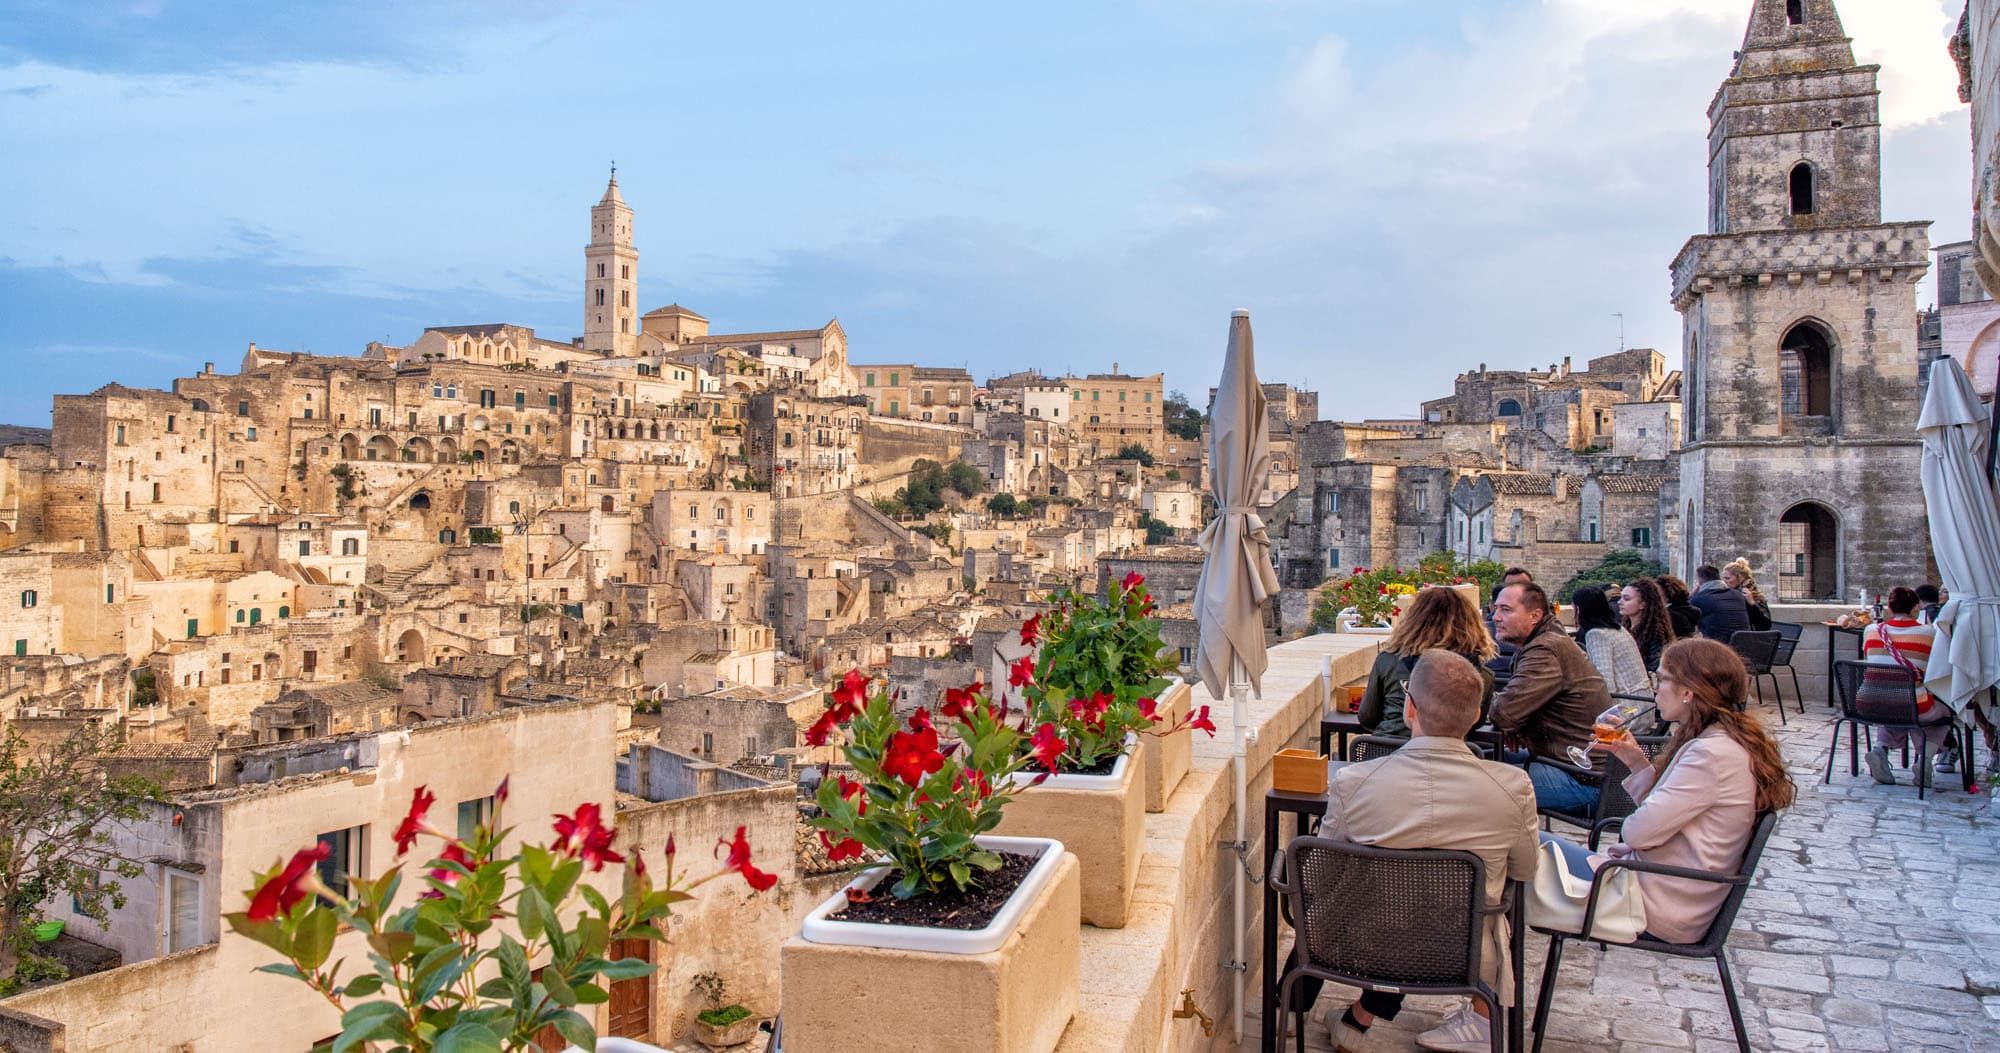 Featured image for “Where to Eat & Drink in Matera: Best Restaurants & Bars”